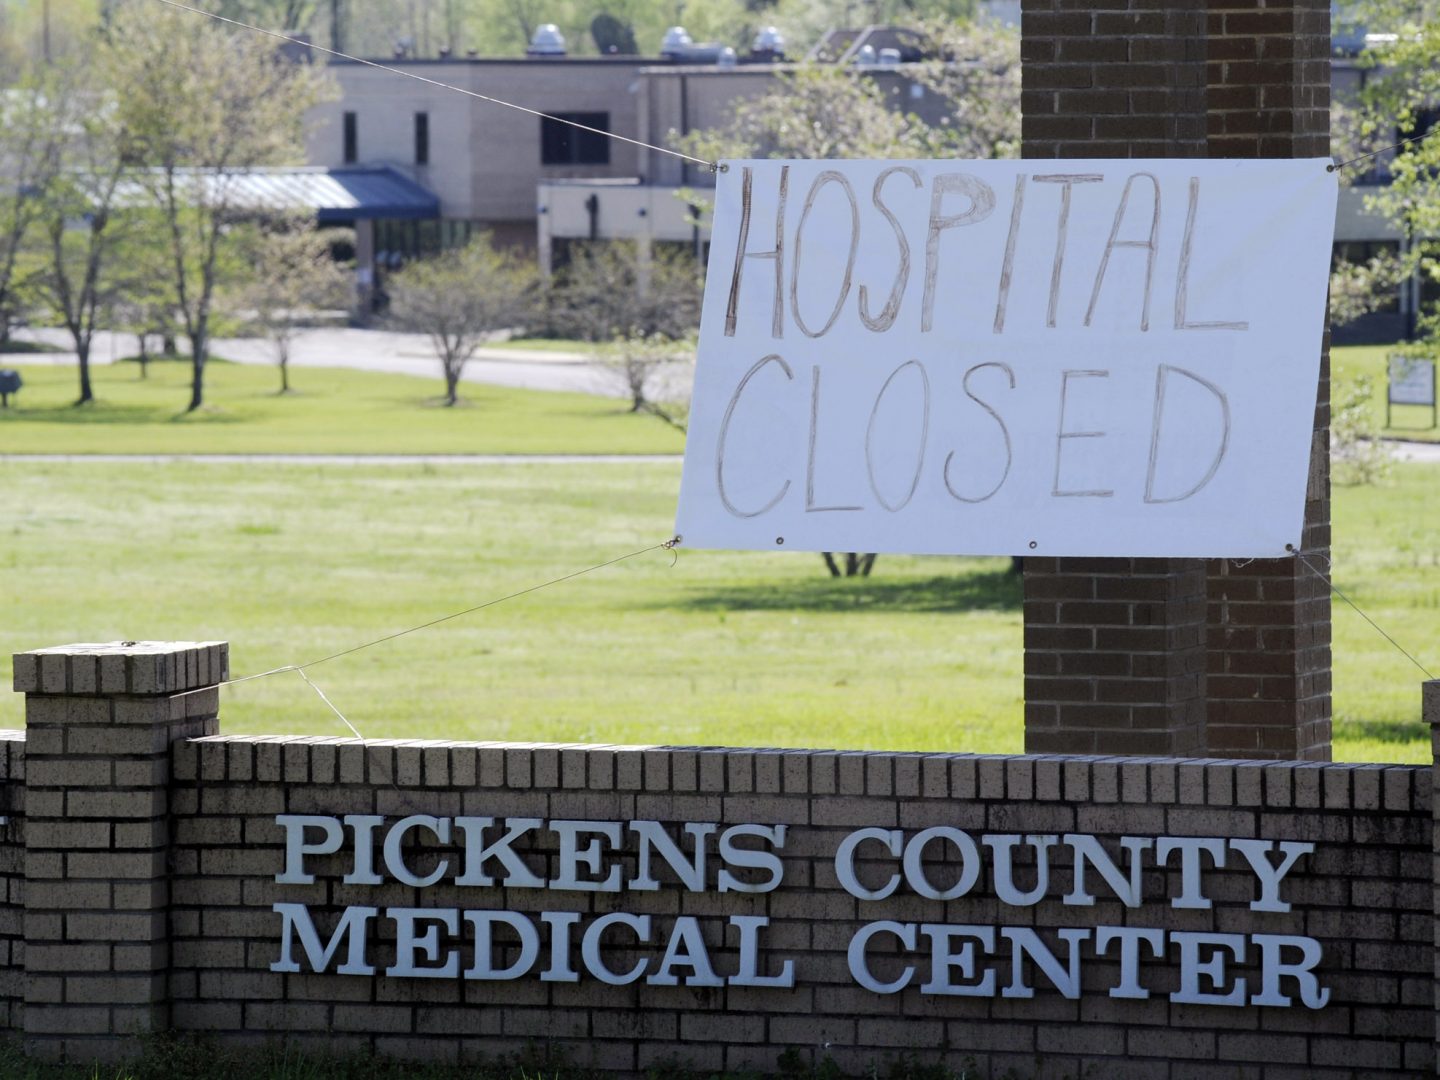 The recently closed Pickens County Medical Center in Carrollton, Ala., is one of the latest health care facilities to fall victim to a wave of rural hospital shutdowns across the U.S. in recent years. With hundreds of hospitals endangered, residents are worried about getting health care amid the coronavirus outbreak.